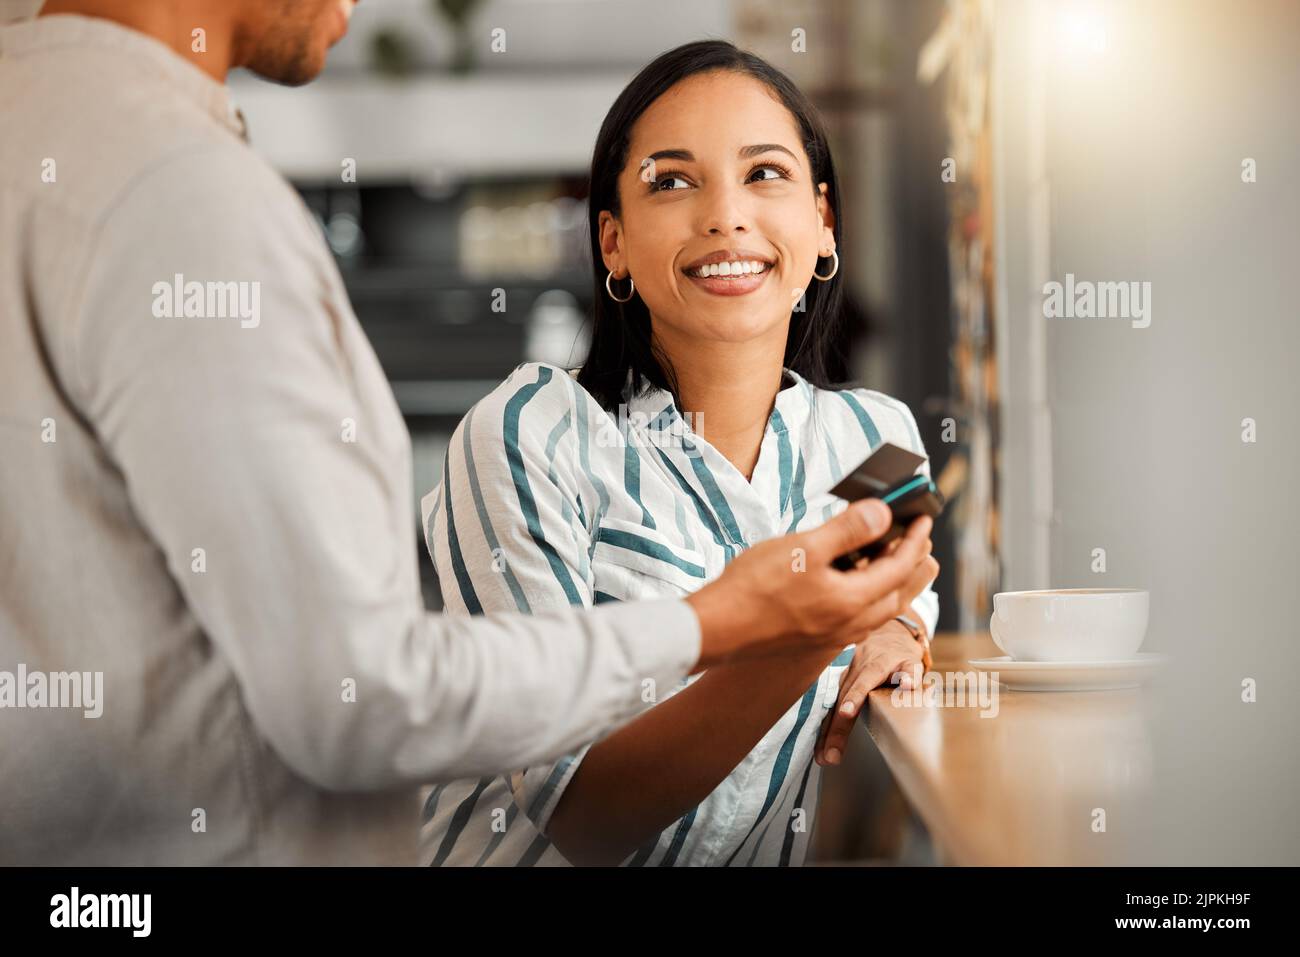 Customer paying using contactless credit card, standing by cafe or restaurant bar counter. Smiling woman make cashless payment for coffee bill with Stock Photo